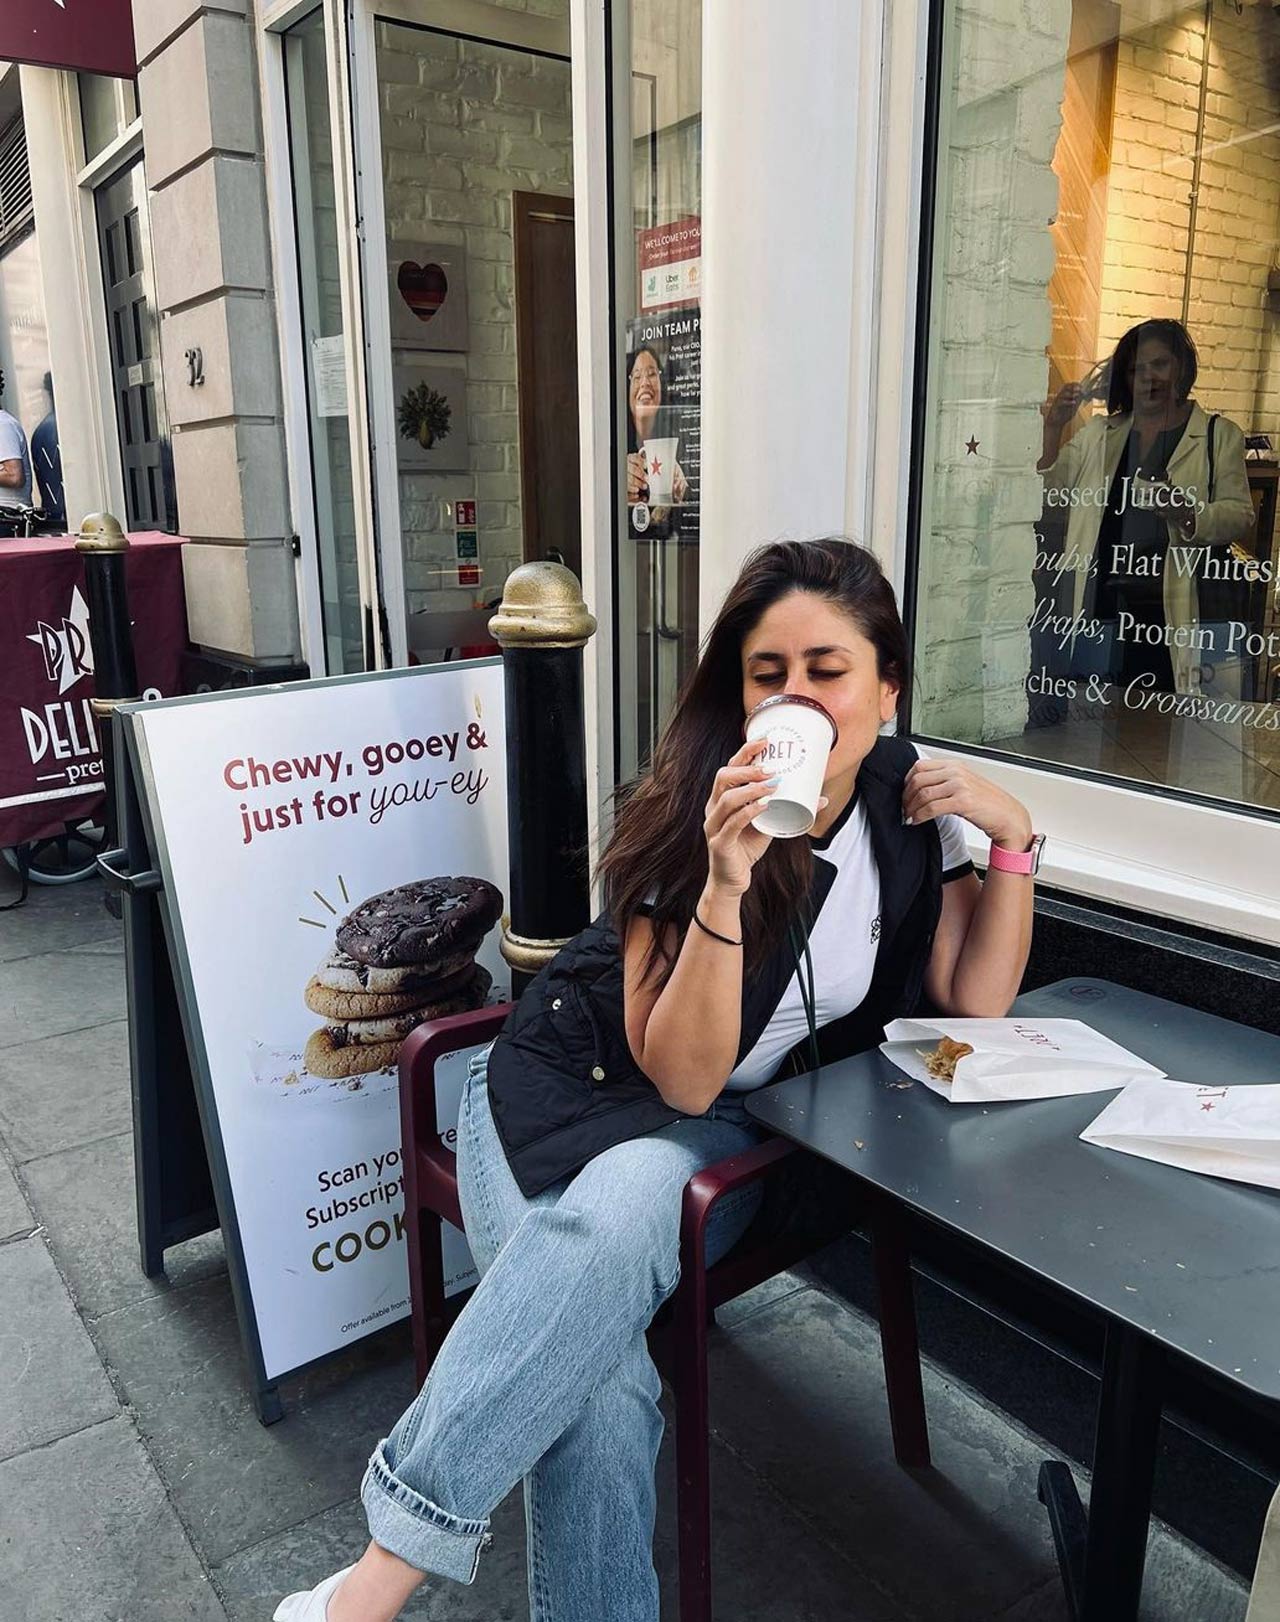 'Waited two years for you baby,' wrote Kareena Kapoor as she enjoyed her sip of coffee on the streetside of the U.K. Also, taking to the social media application, Kareena Kapoor dropped a picture of her husband Saif Ali Khan from the streets of the UK, where the actor seen holding shopping bags in his hand, hinting that he is on a shopping spree